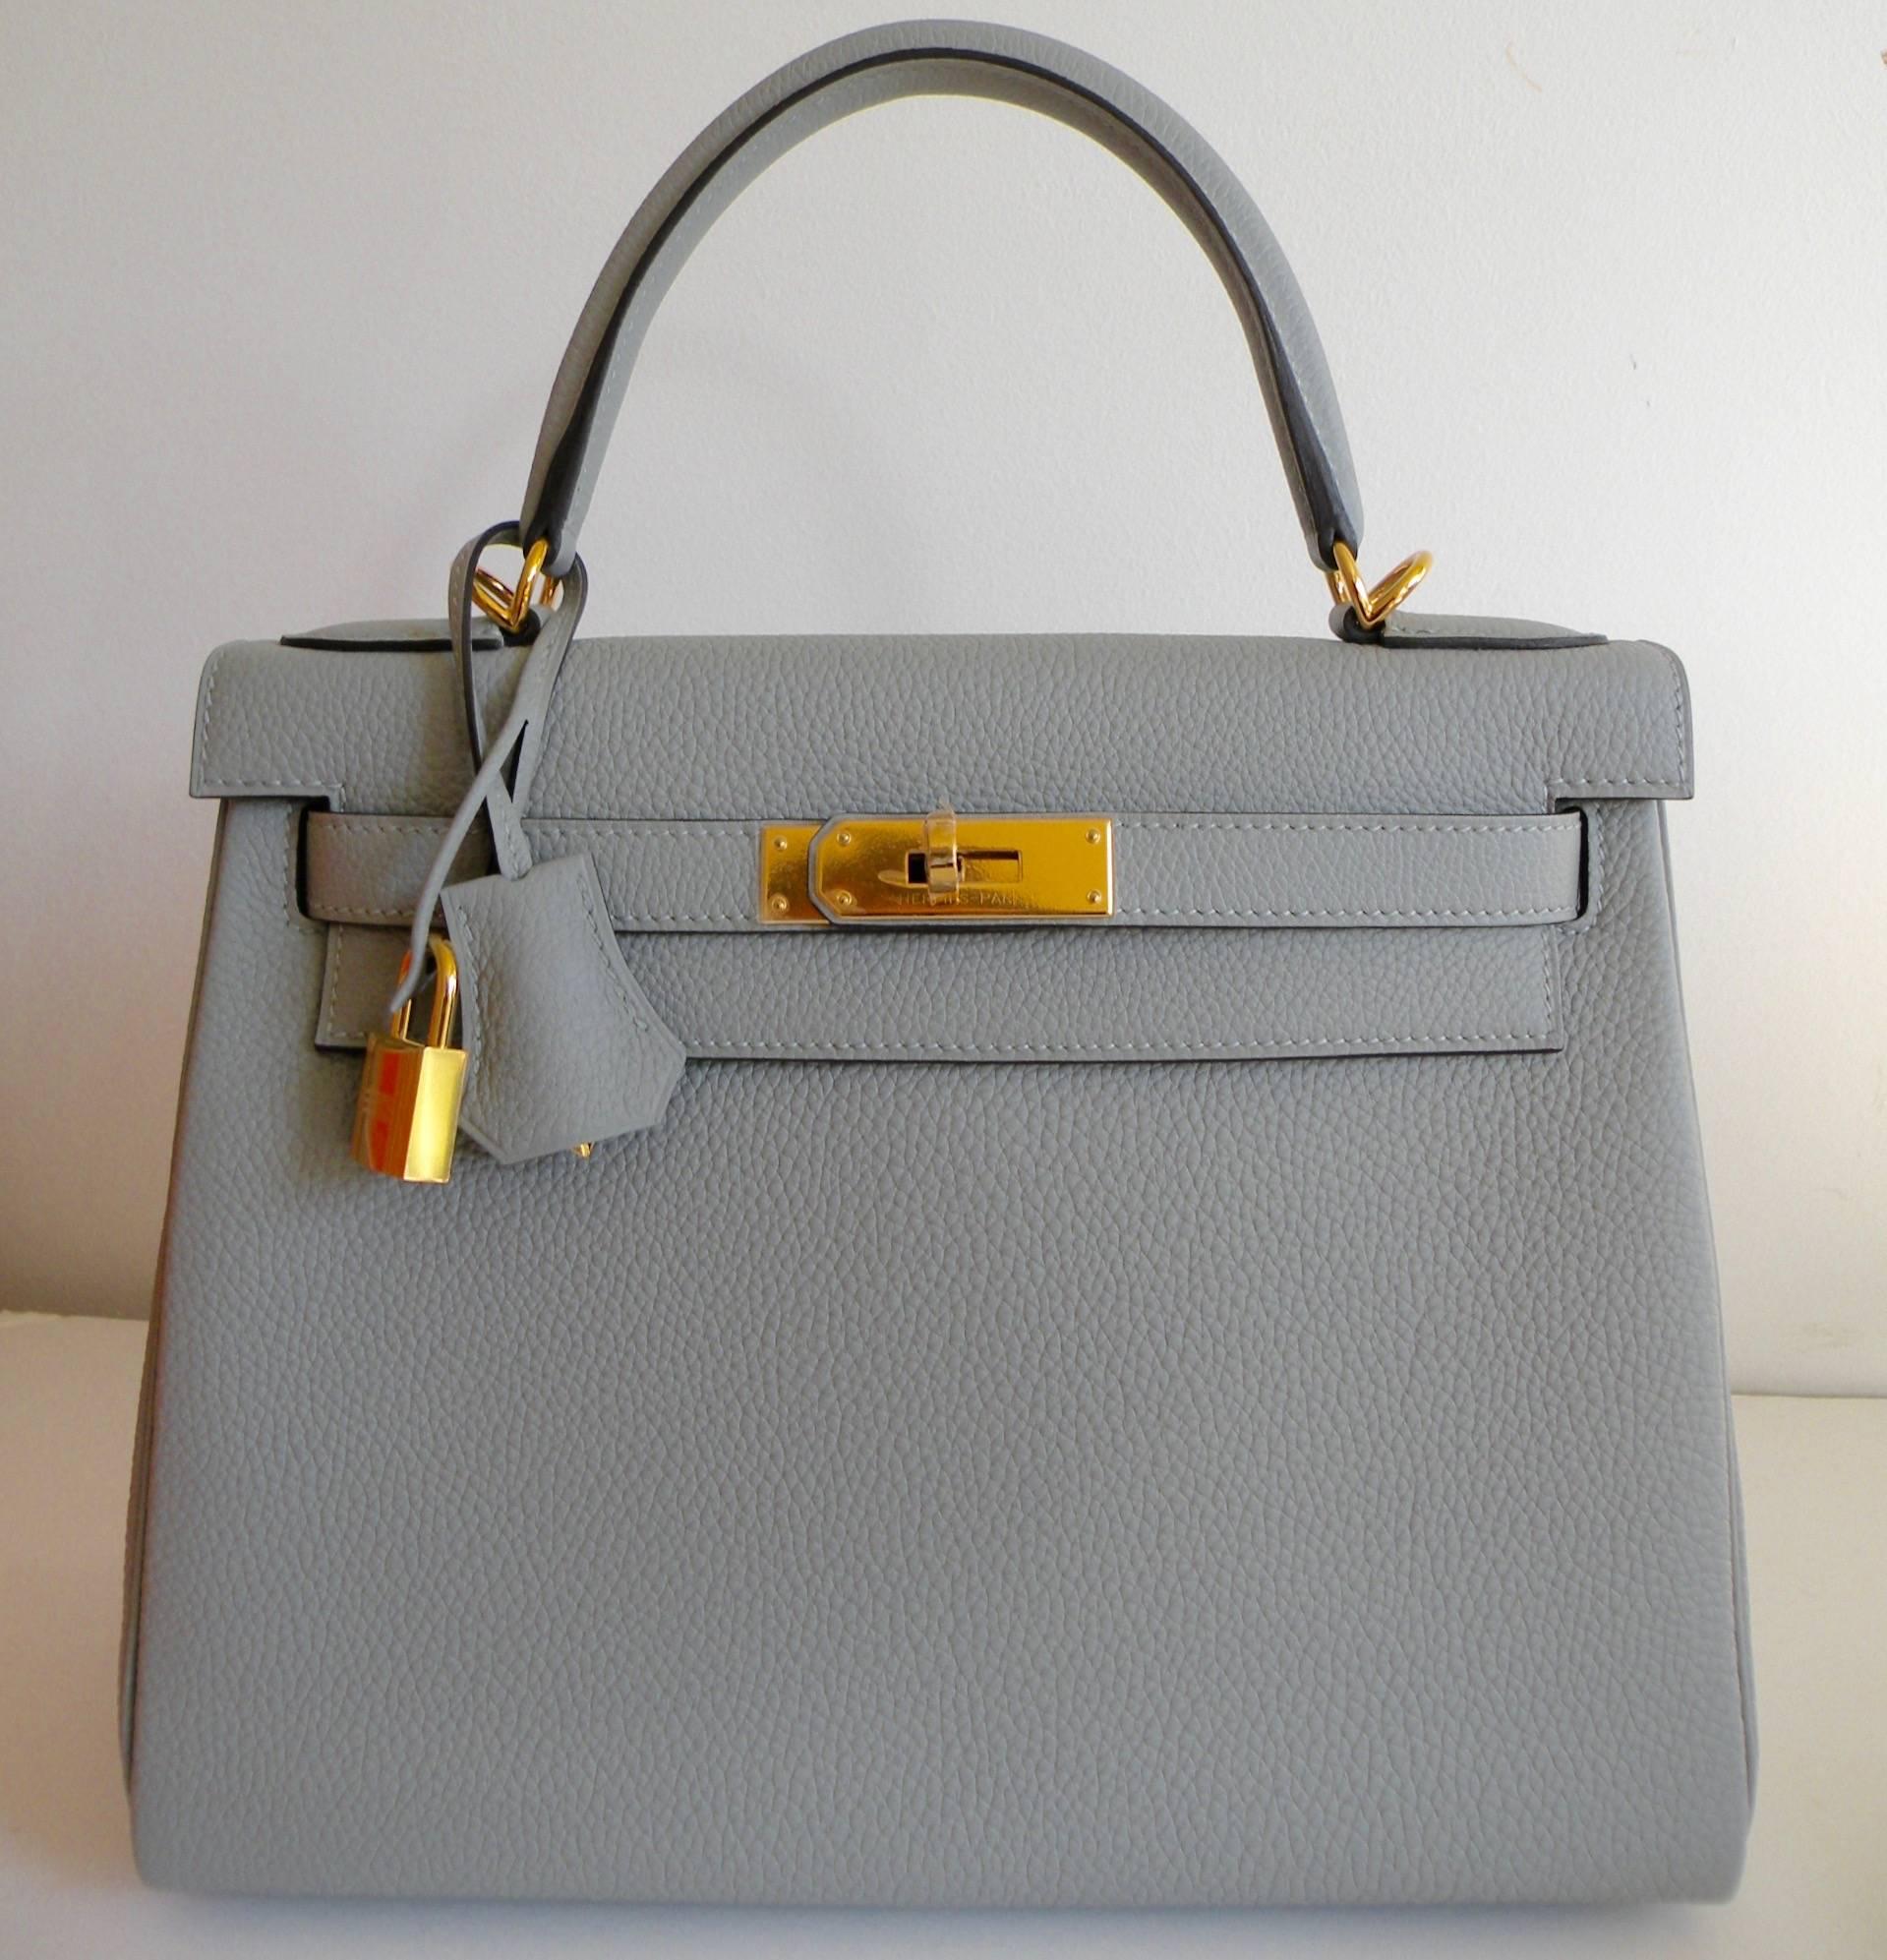 Hermès
28cm Birkin Bag
Brand new Color from Hermes, called Gris Mouette. Its a light grey color, a great neutral. This Kelly is set with Gold Hardware, which makes it such a special piece! Just spectacular color!
Size: 28cm Kelly
Color: Gris